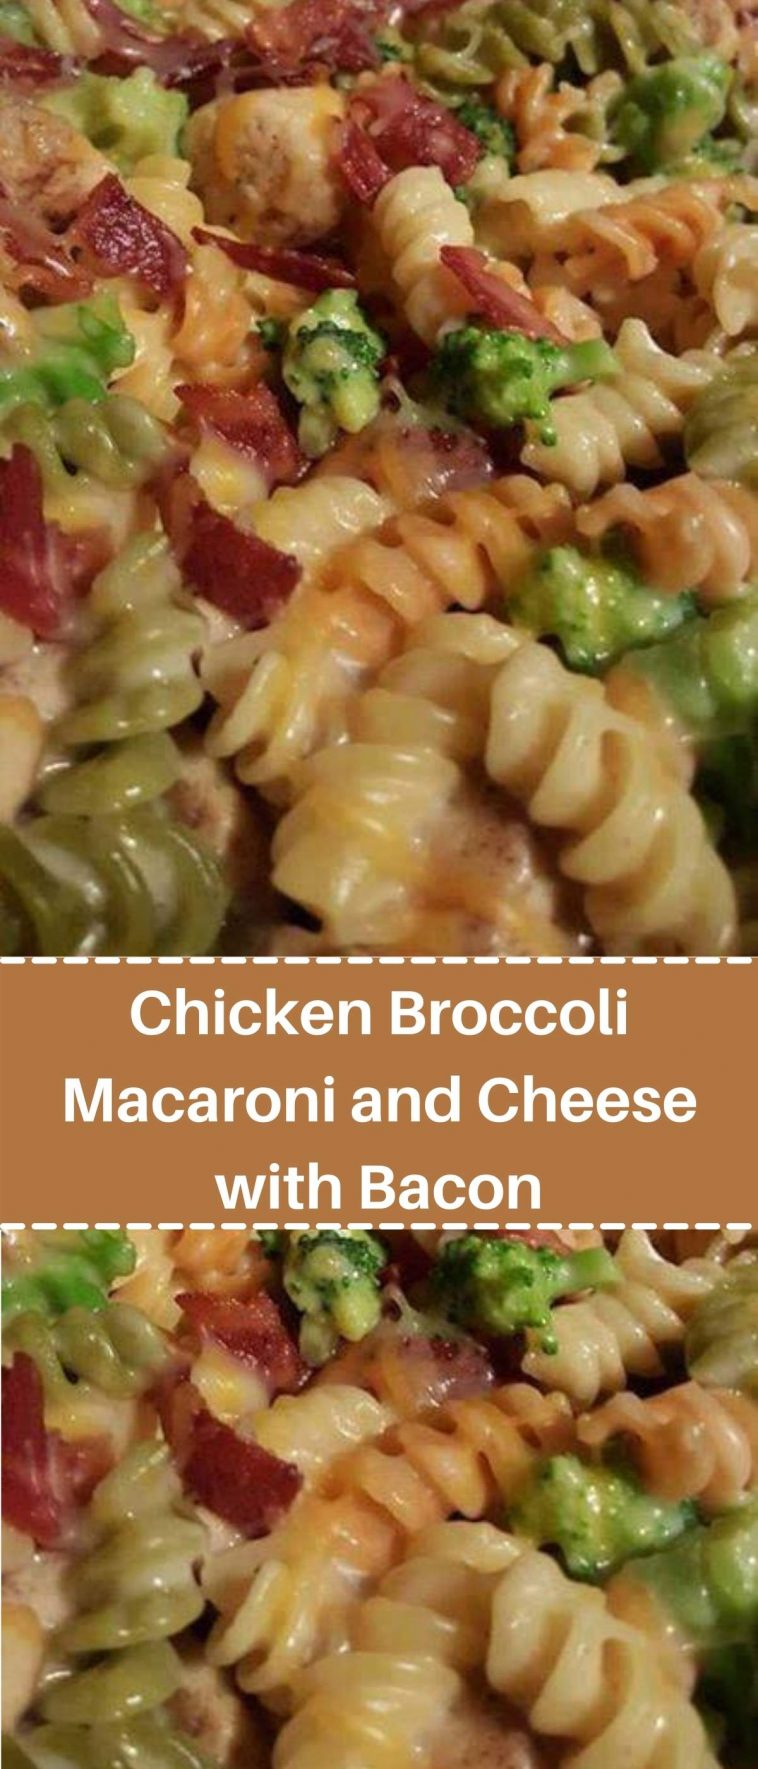 Chicken Broccoli Macaroni and Cheese with Bacon